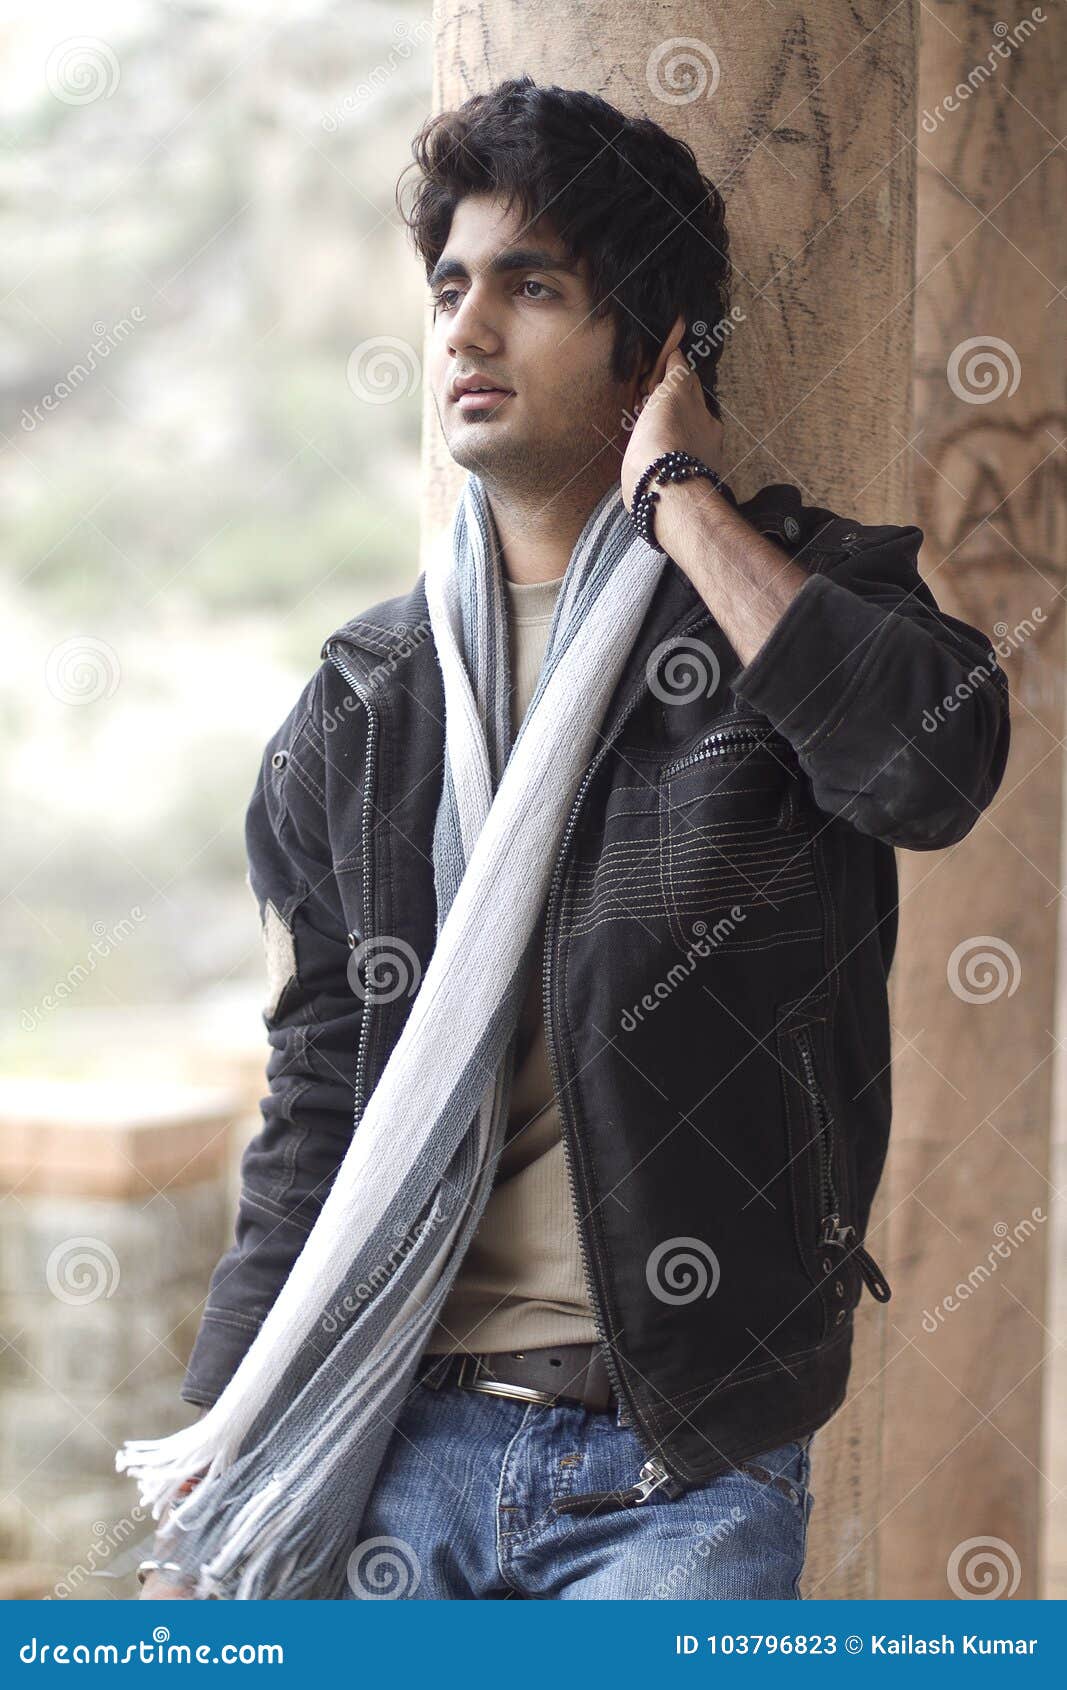 Indian male model pictures